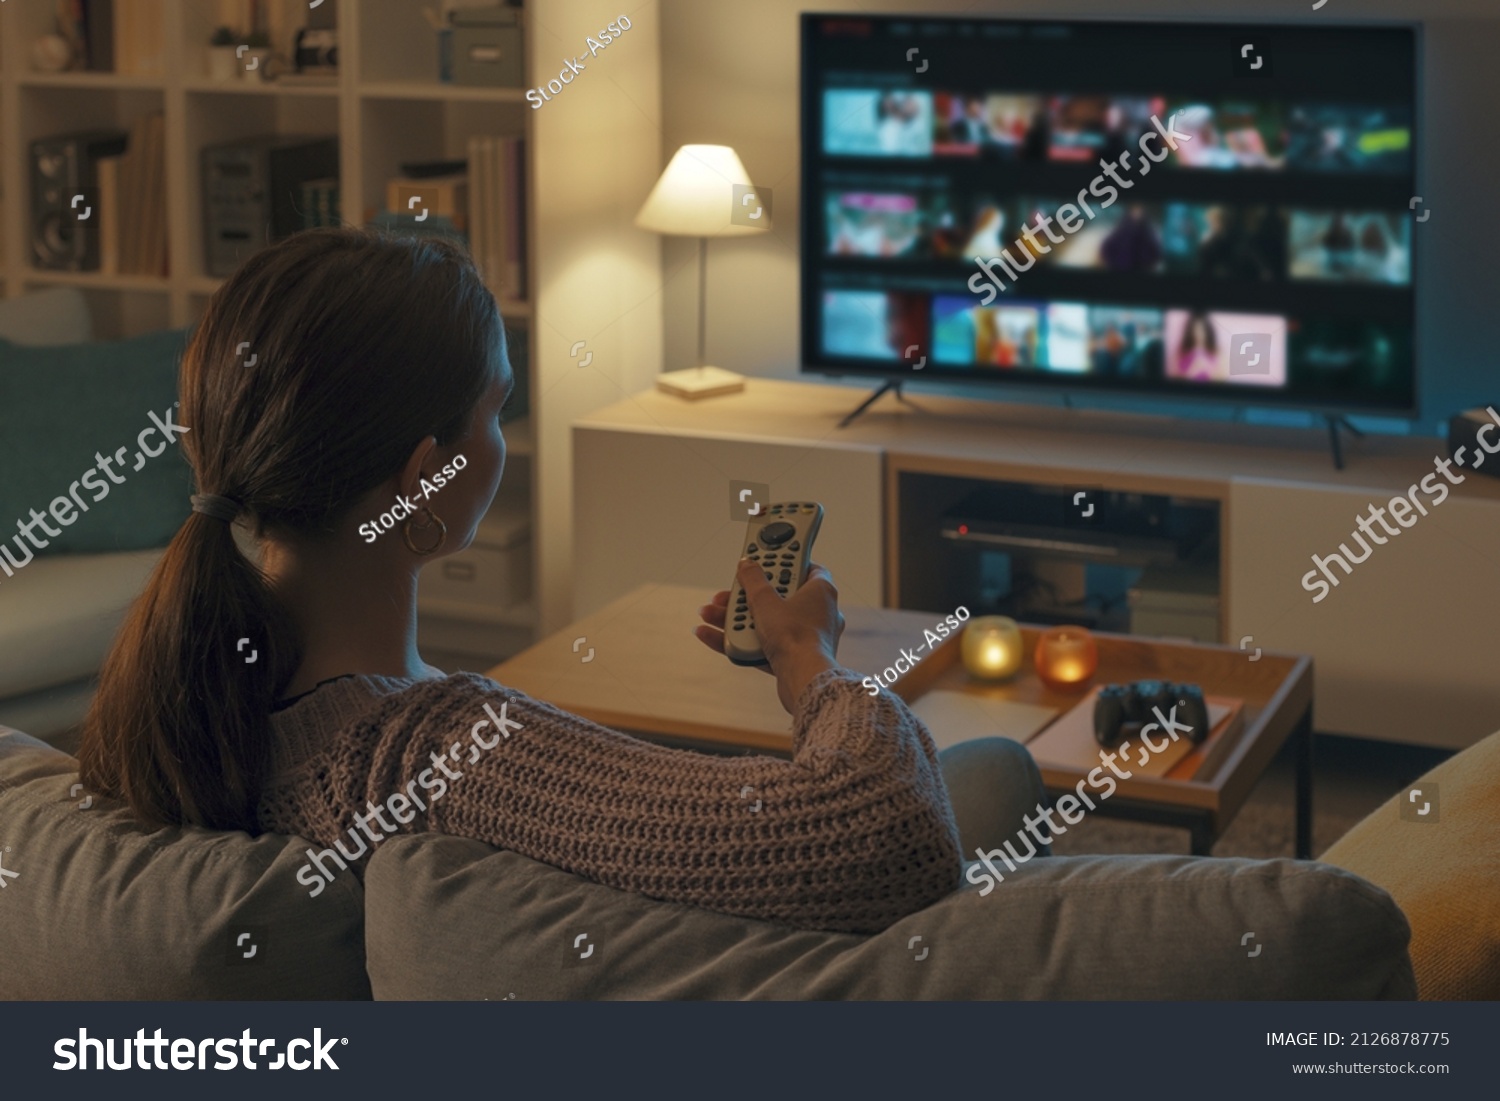 Woman relaxing on the couch, she is using the remote control and choosing a TV show or movie on the television menu #2126878775